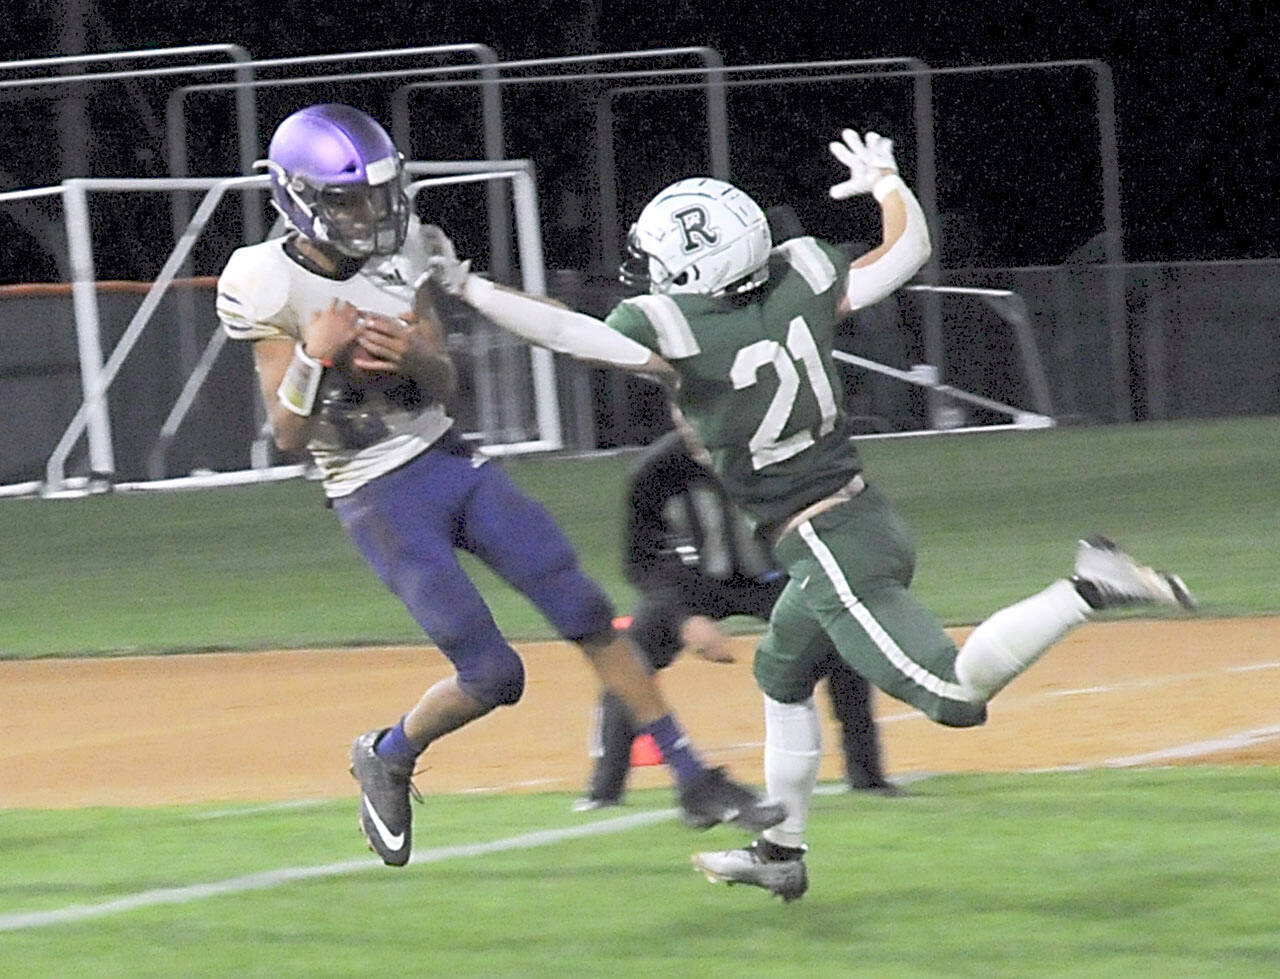 KEITH THORPE/PENINSULA DAILY NEWS Sequim’s Toppy Robideau, left, makes an end-zone reception over the defense of Port Angeles’ Tanner Jacobsen in the closing seconds of the fourth quarter to put the Wolves over the Roughriders on Friday night in Port Angeles.